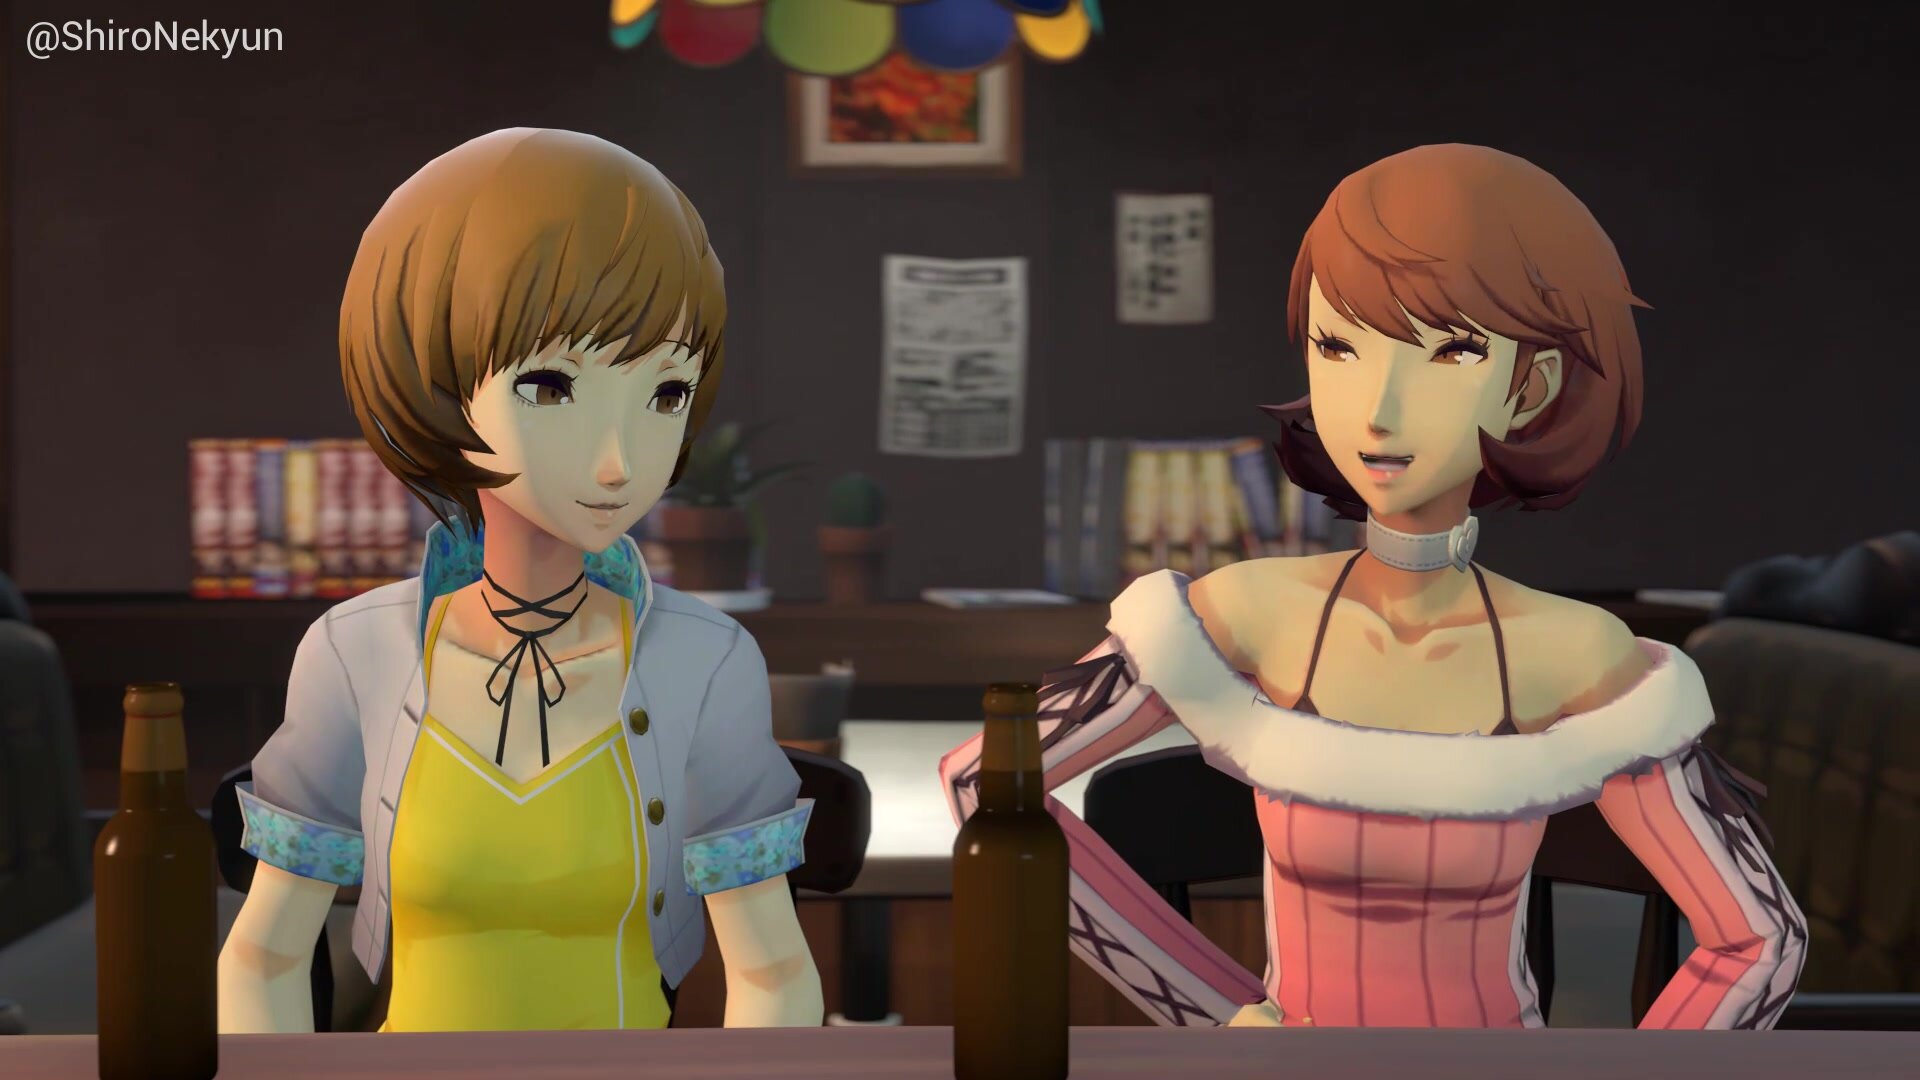 Chie and Yukari farting and burping together